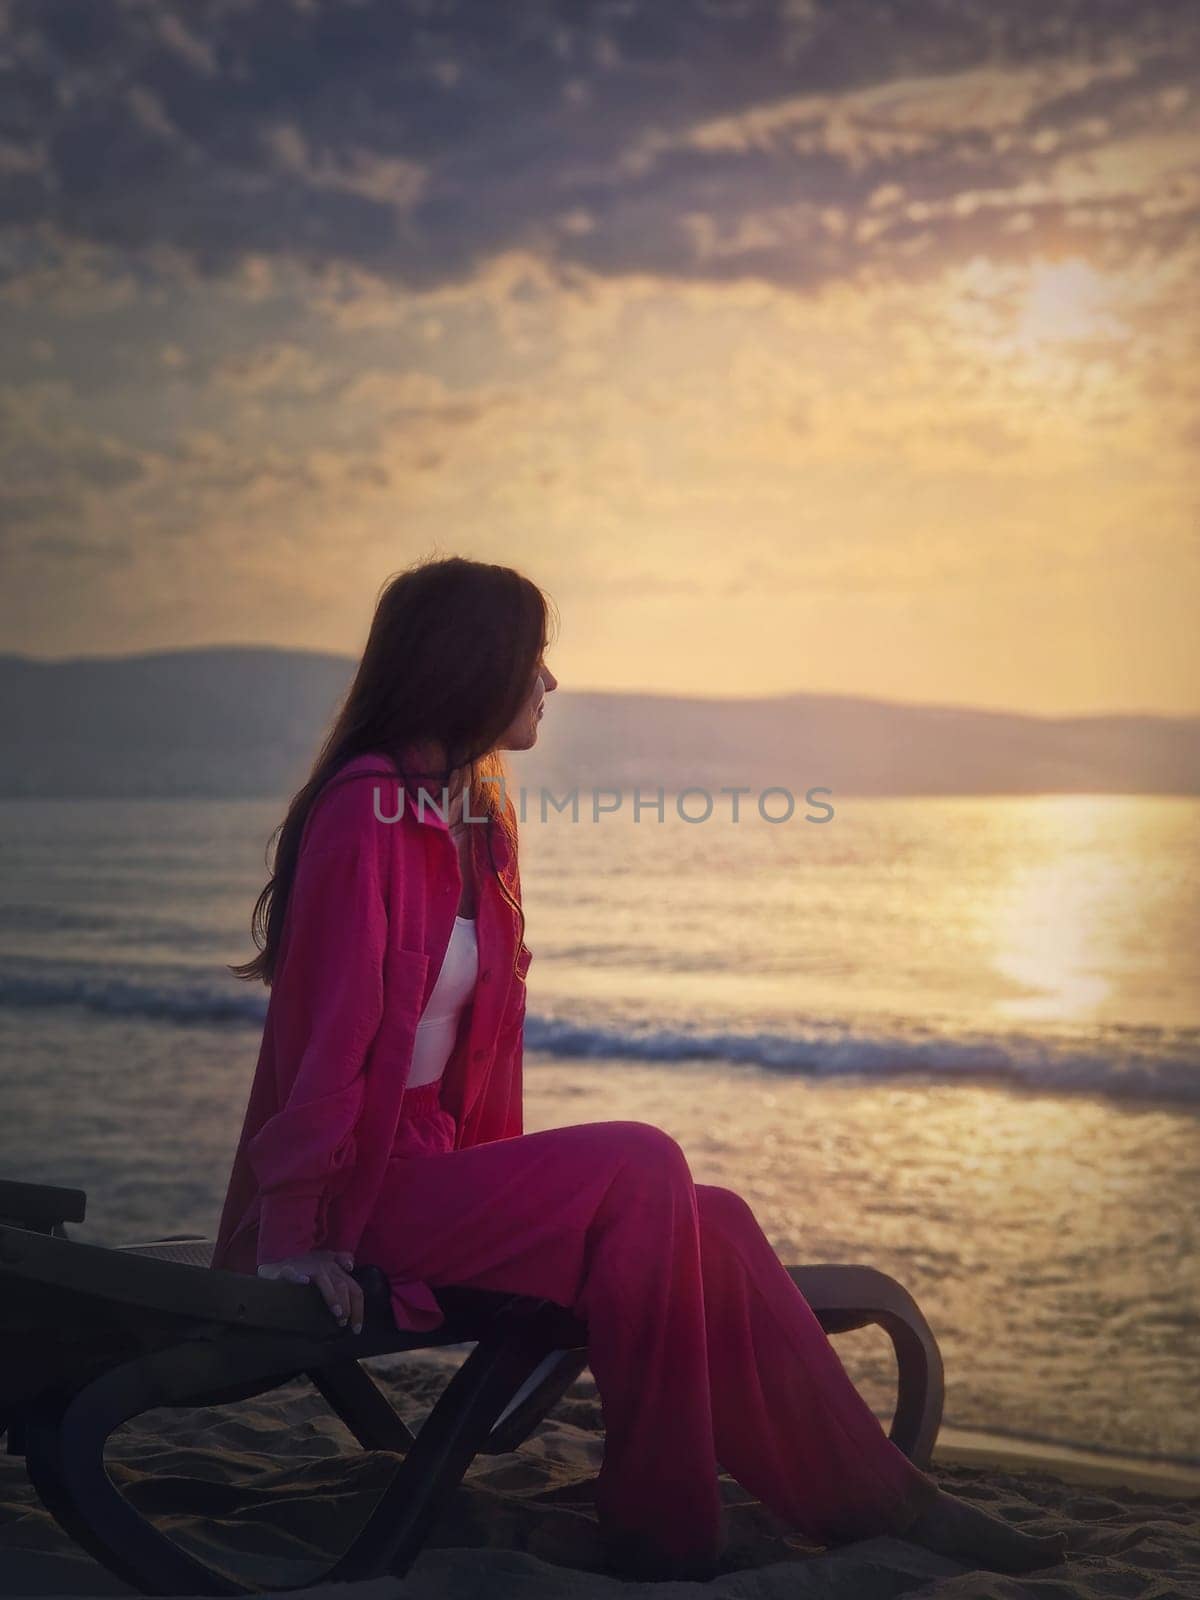 Carefree young woman aesthetic portrait sitting relaxed on the sunbed at the beach looking at the sunrise above the sea. Beautiful seaside dawn scene. Summer holiday, travel and relaxation concept by psychoshadow